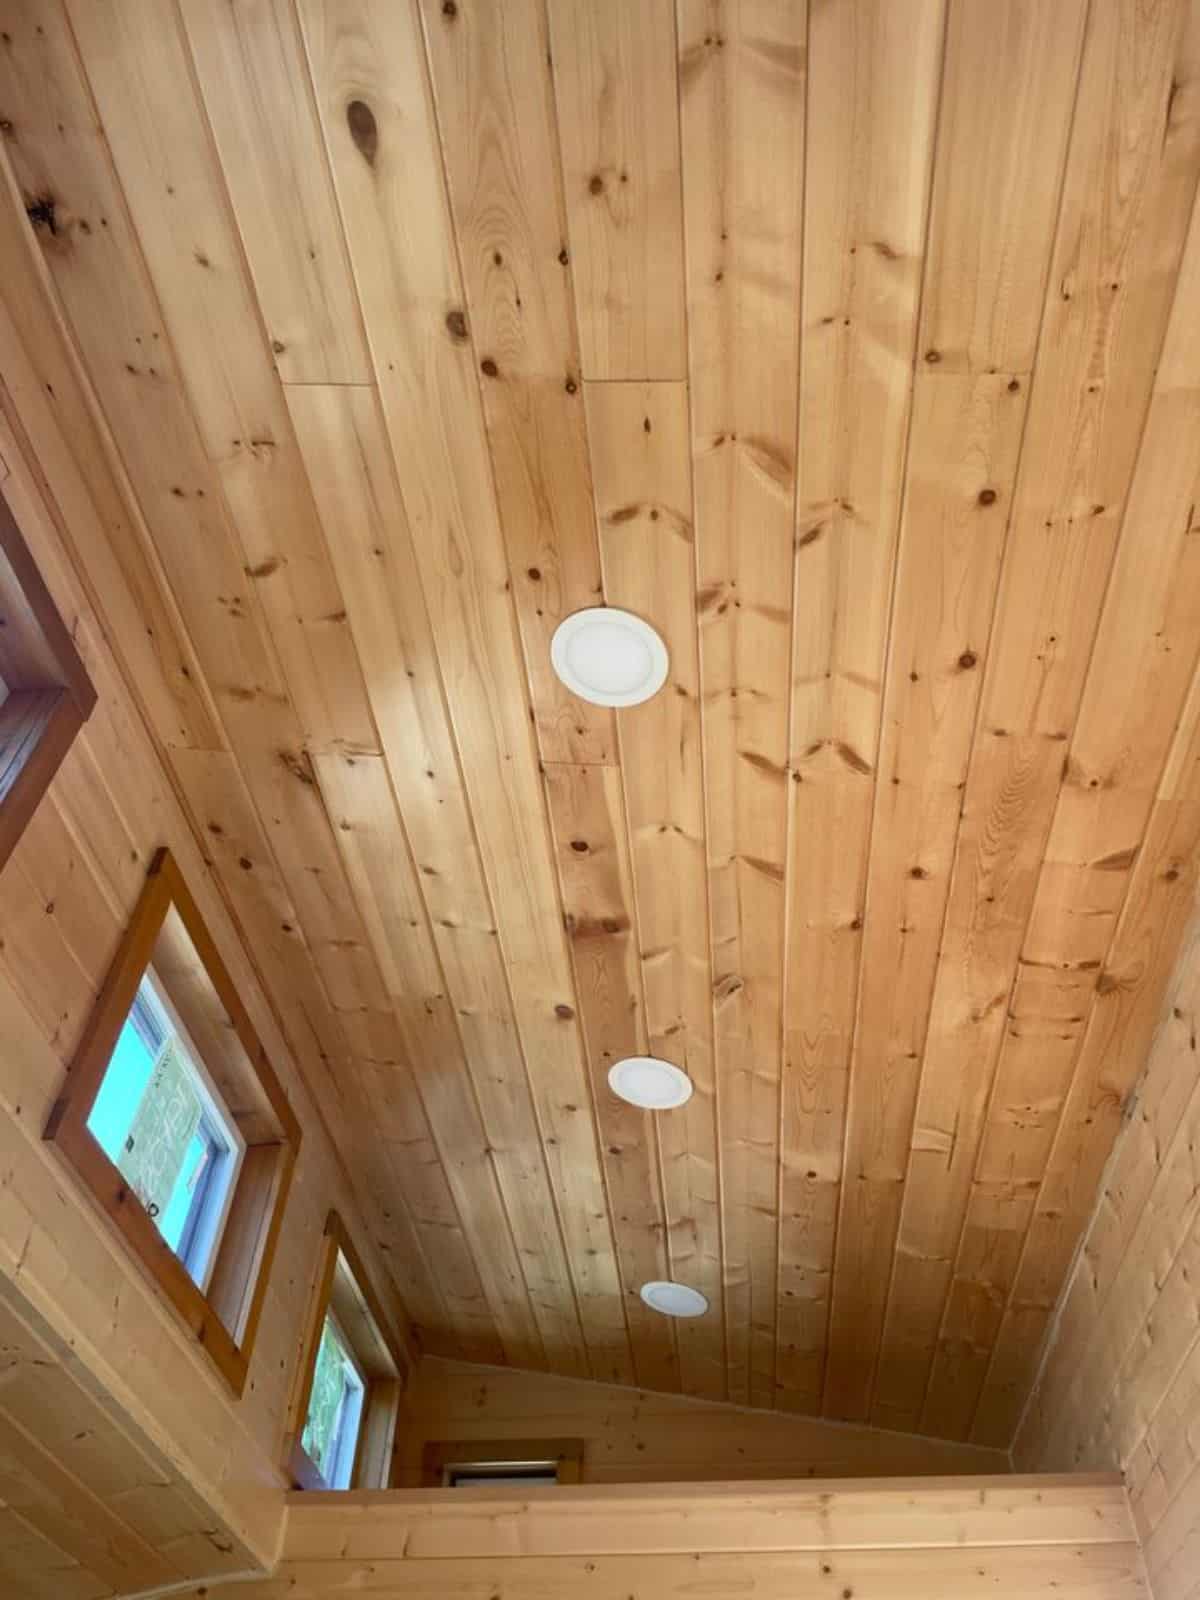 LED lights installed all over the roof of 20' tiny trailer house